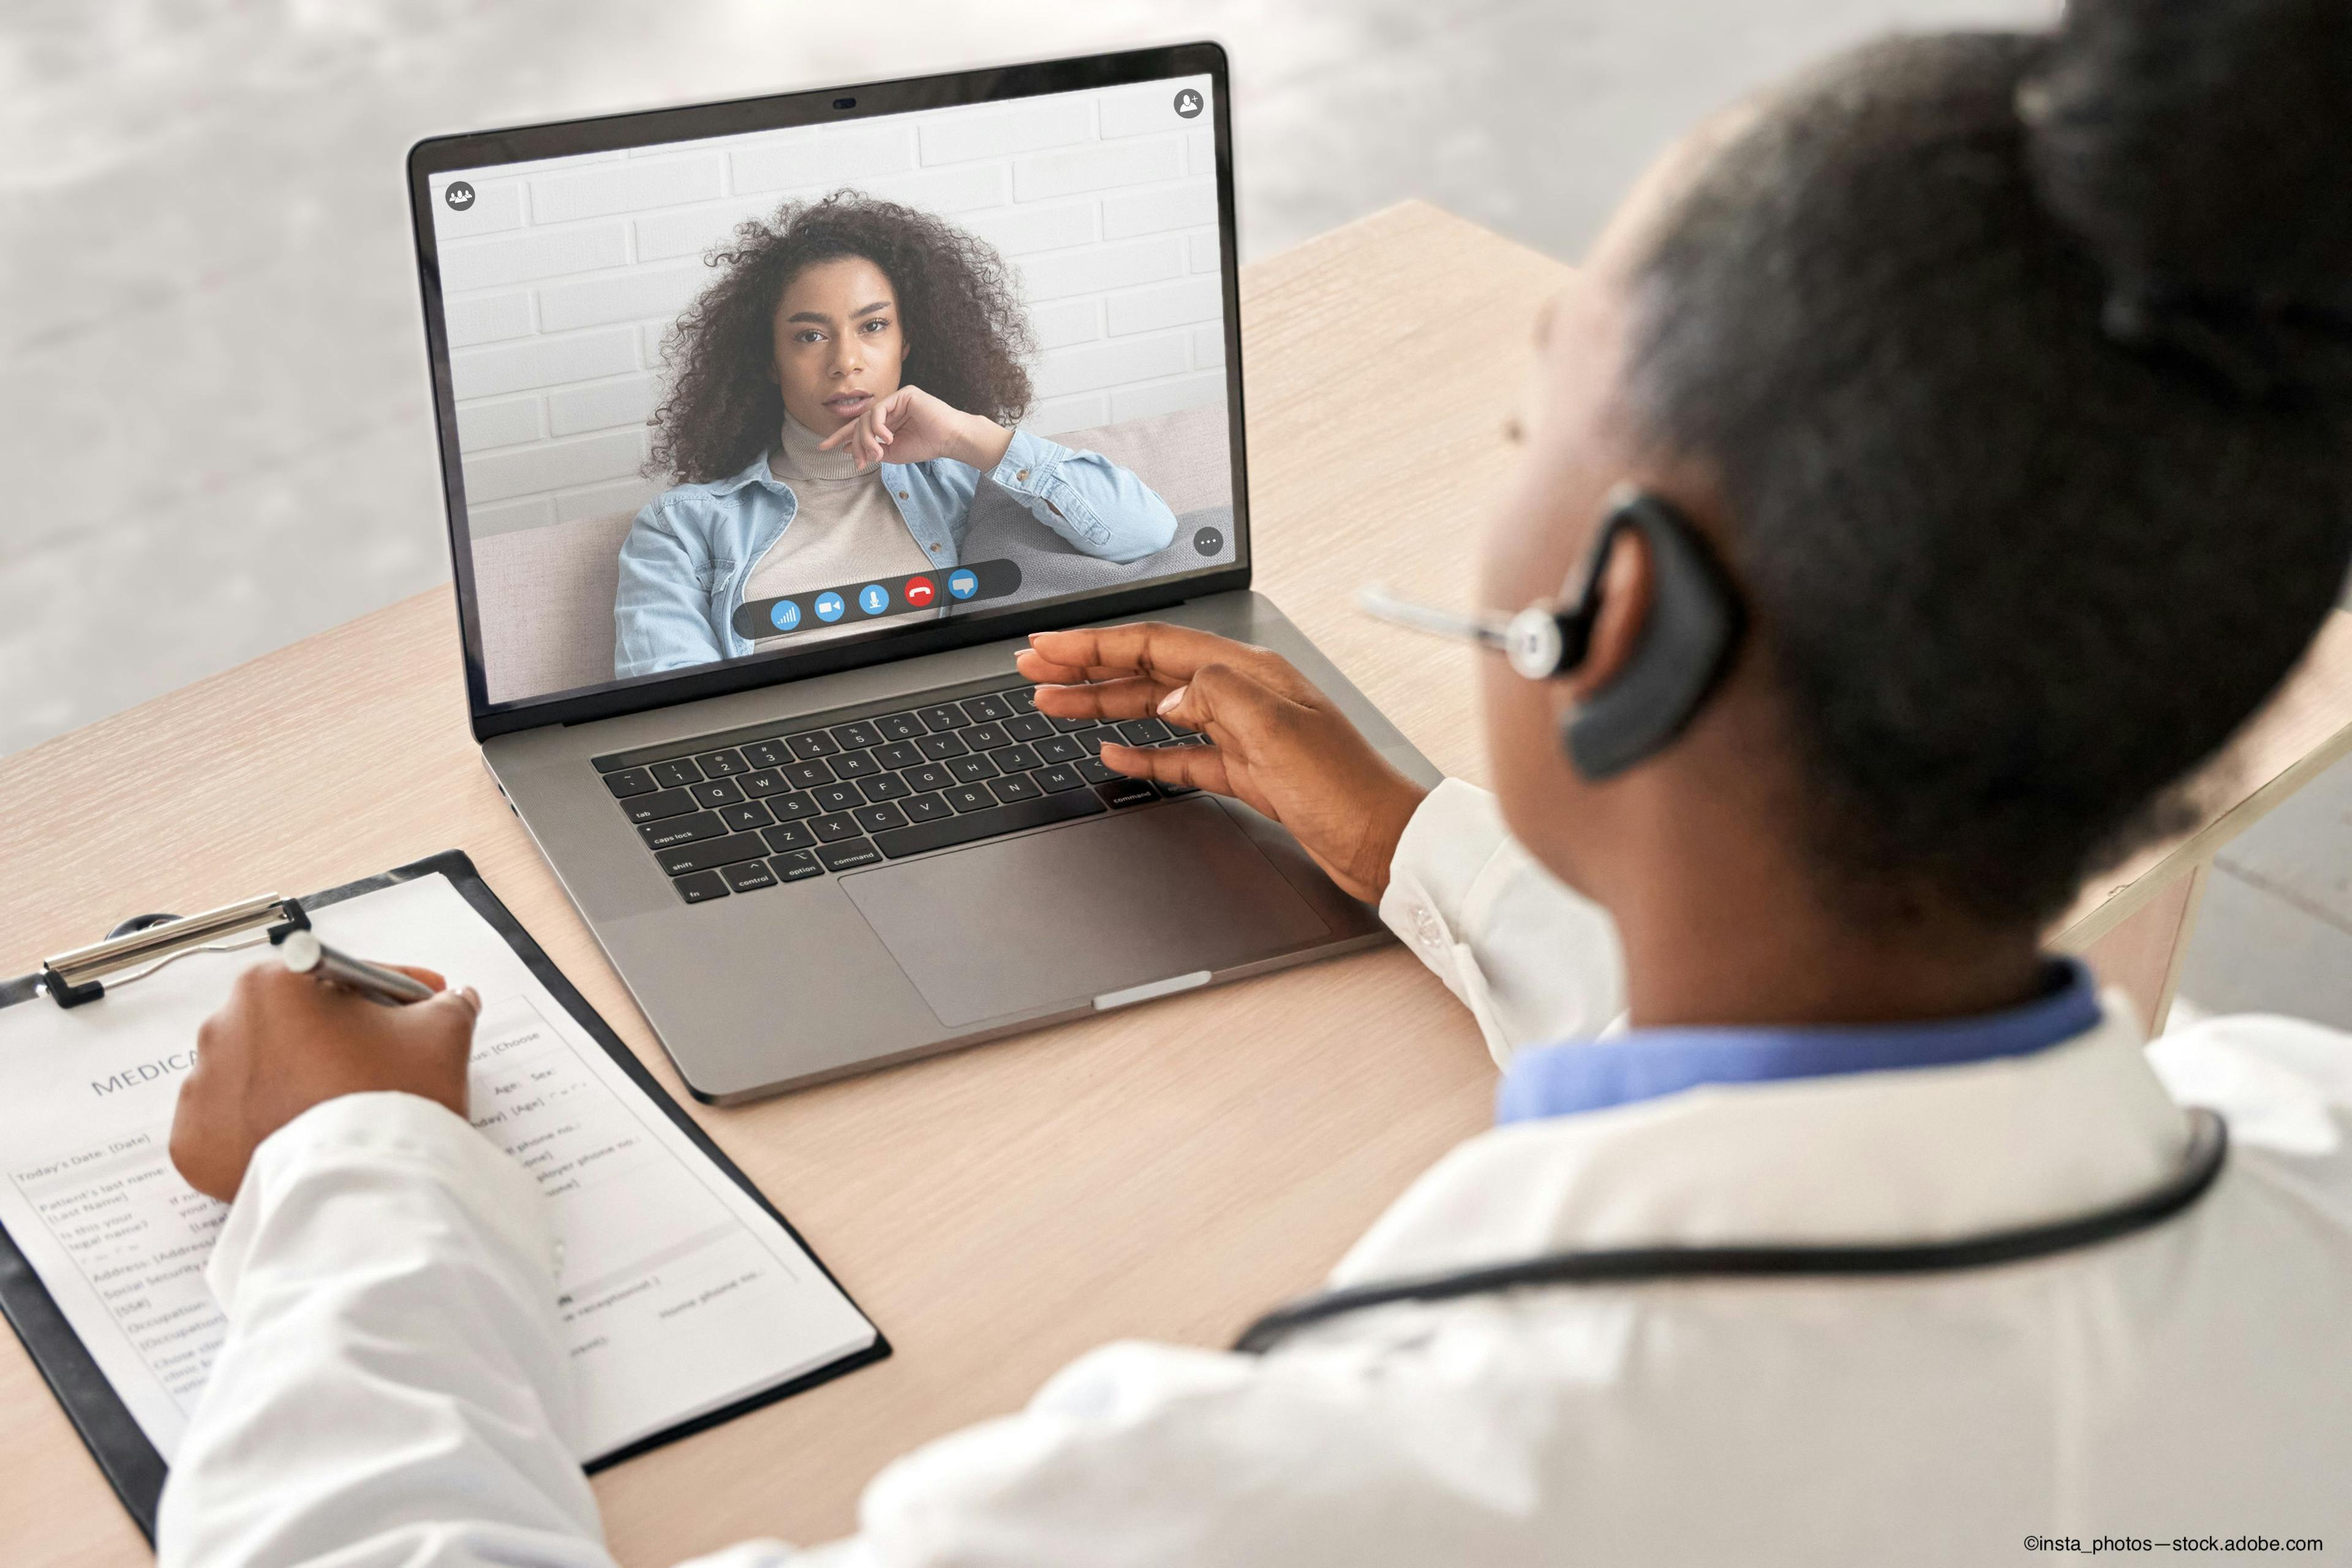 Outlook is bright for telemedicine in ophthalmology